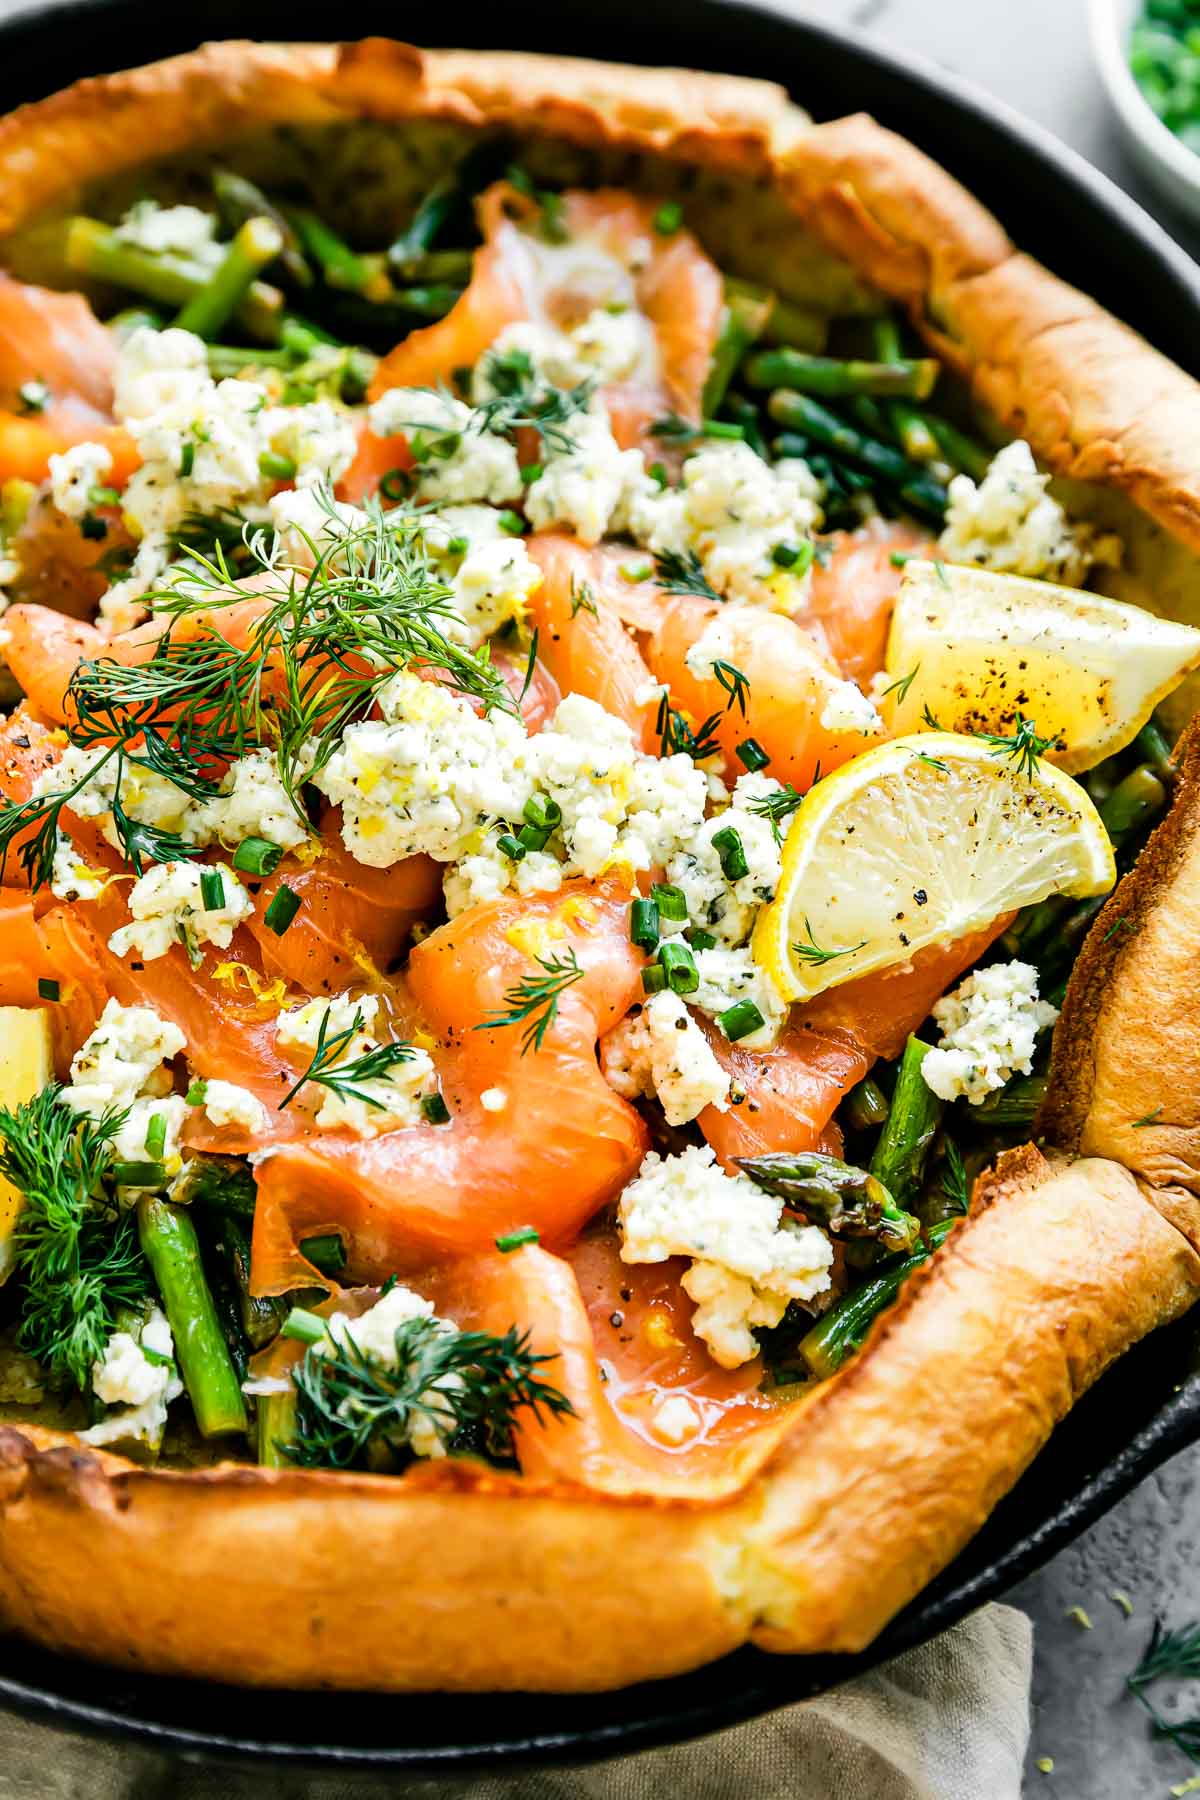 A macro close up and slightly side angle shot of an assembled Dutch baby topped with smoked salmon, asparagus, and a Boursin cheese fills a large black cast iron skillet. The Dutch baby is garnished with lemon wedges, a lemon butter sauce, and fresh herbs. The skillet sits atop a light gray textured surface with a light cream linen napkin tied around the skillet handle.